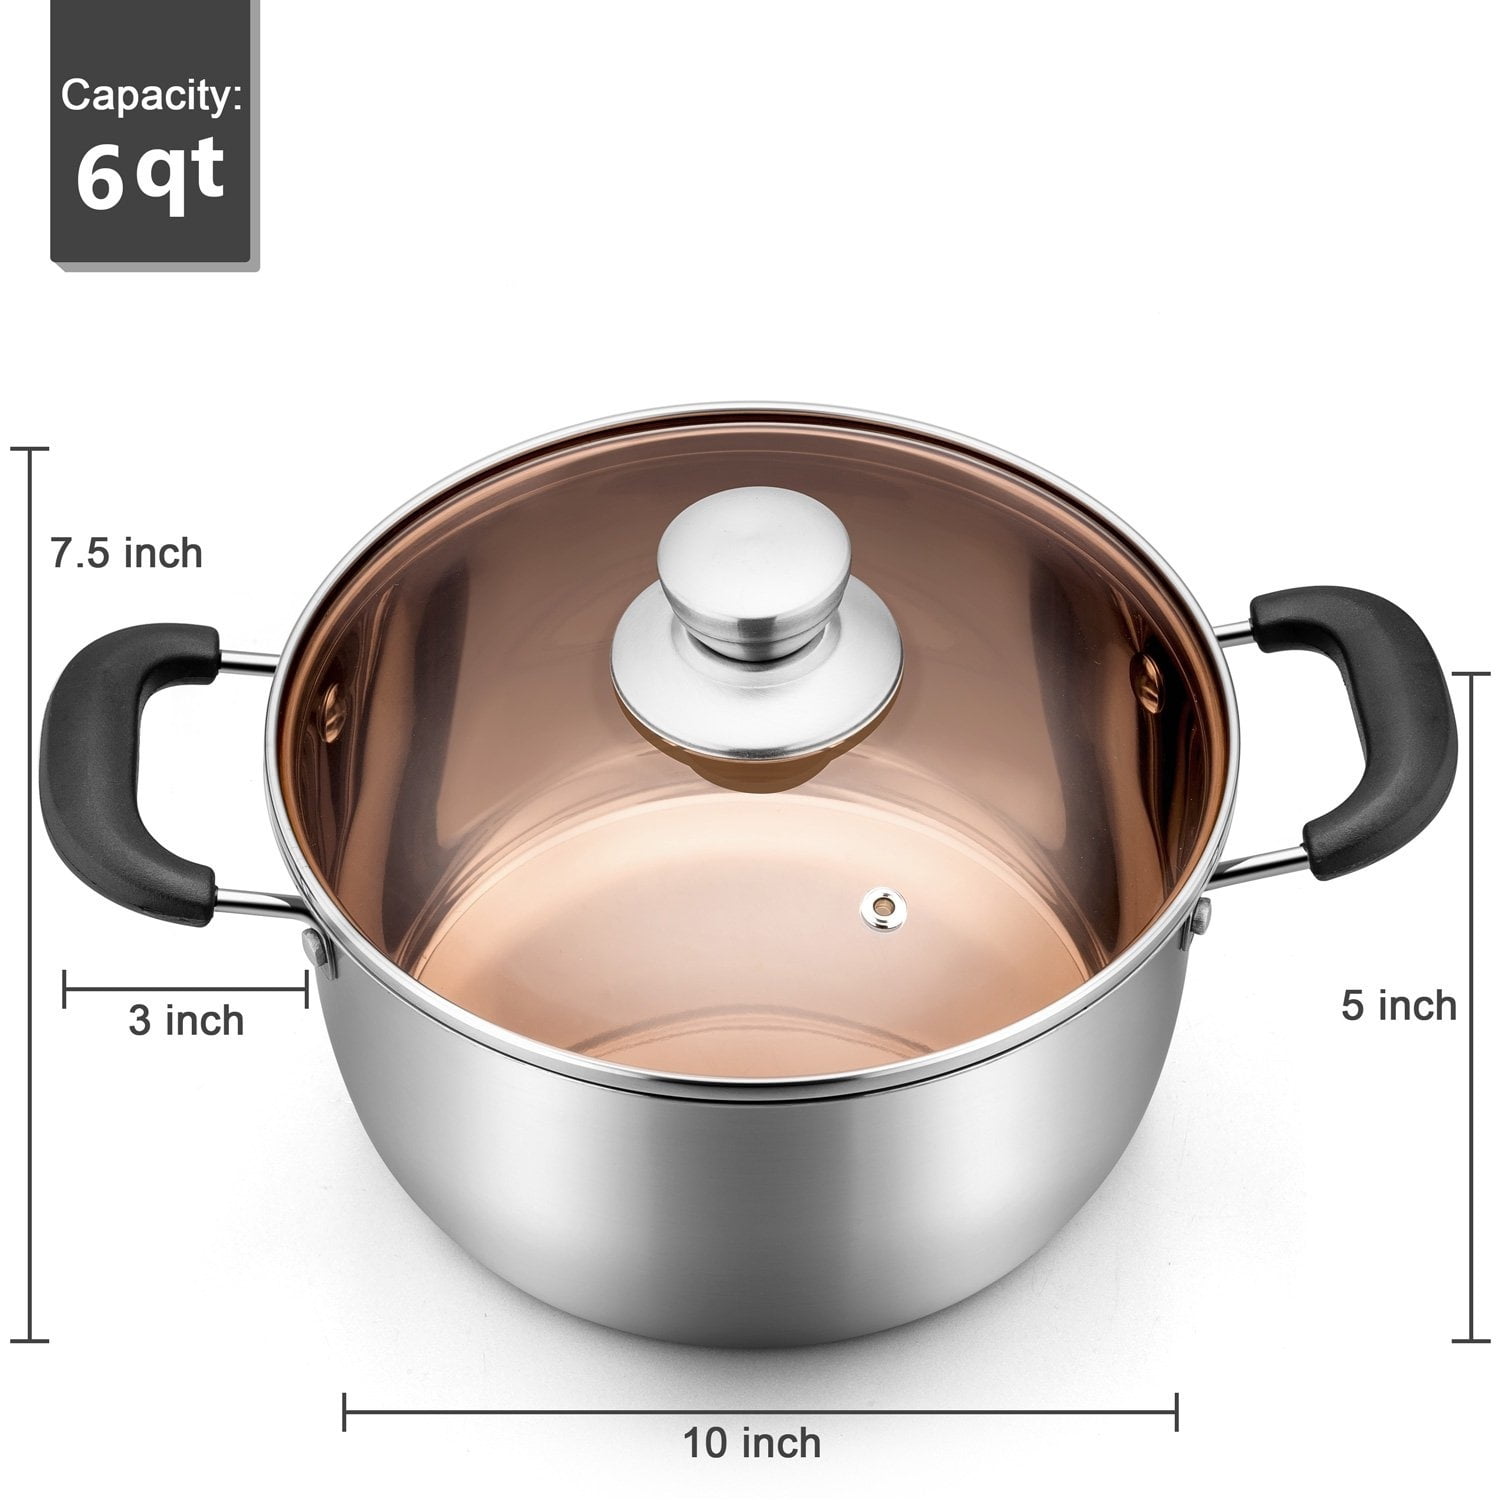  AOSION 6 Quart Stainless Steel Stockpot, All-In-One 6QT Stock  Pot, Soup Pasta Pot with Lid, Cooking Pot, Induction Pot, Sauce Pot  Compatible with All Stoves, Heat-Proof Double Handles, Dishwasher Safe: Home